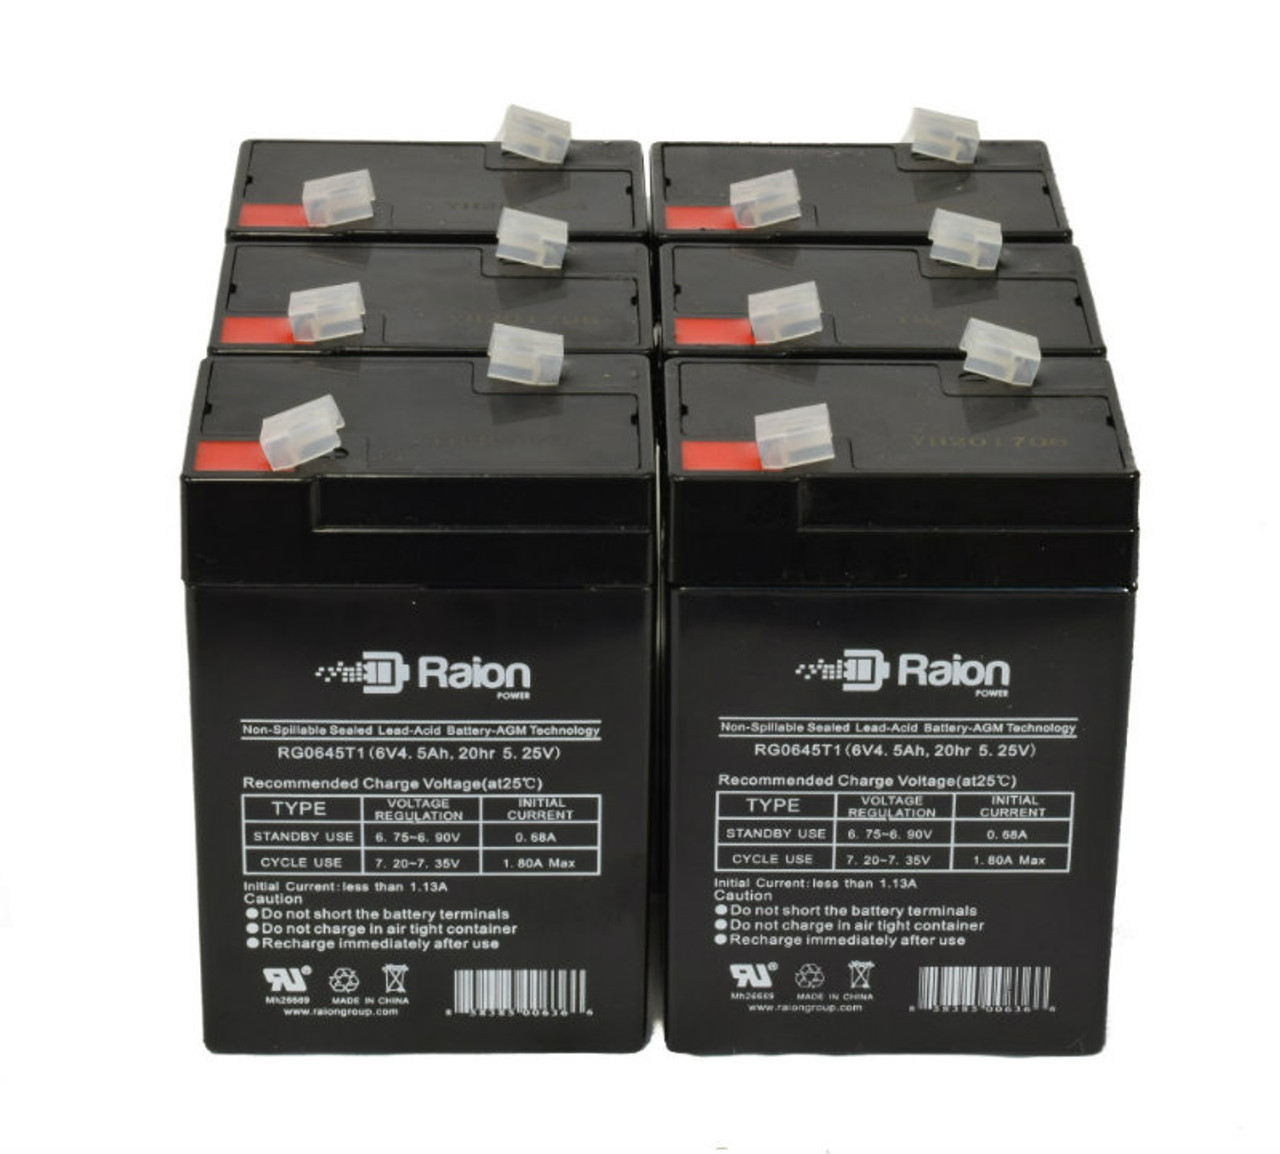 Raion Power 6V 4.5Ah Replacement Emergency Light Battery for Power Mate PM640/PM645 - 6 Pack